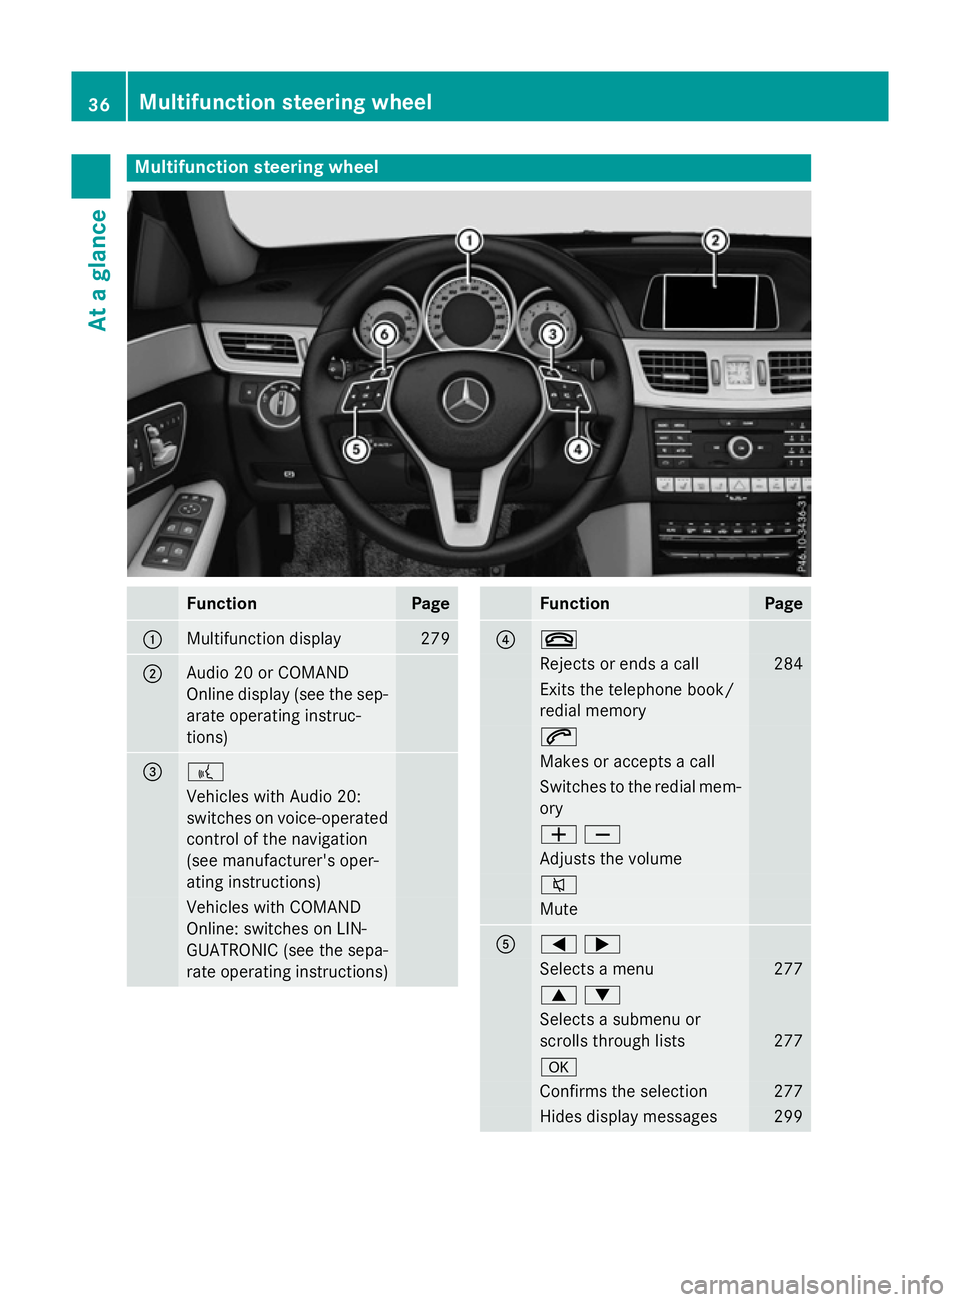 MERCEDES-BENZ E-CLASS SALOON 2015 Owners Guide Multifunction steering wheel
Function Page
:
Multifunction display 279
;
Audi
o20orC OMAND
Online display (see the sep-
arate operating instruc-
tions) = ?
Vehicles with Audi
o20:
switches on voice-op